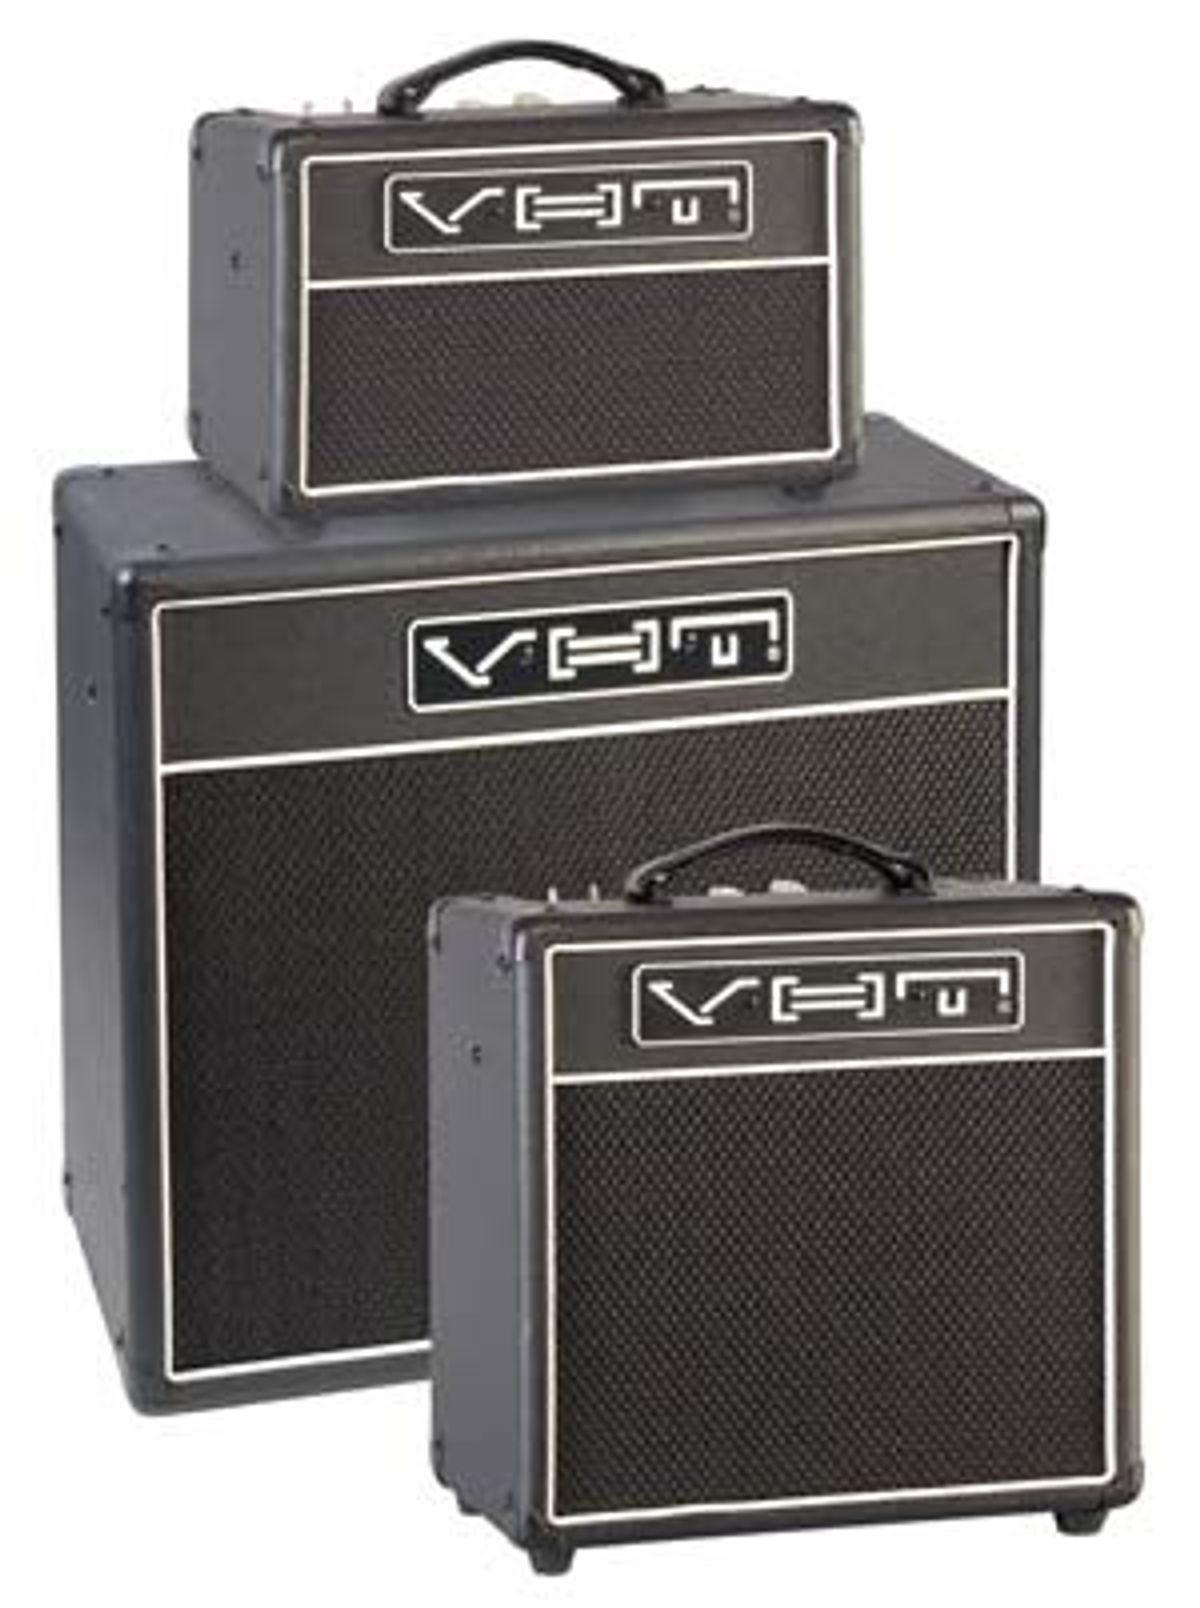 VHT Announces the Special 6 Handwired Amp